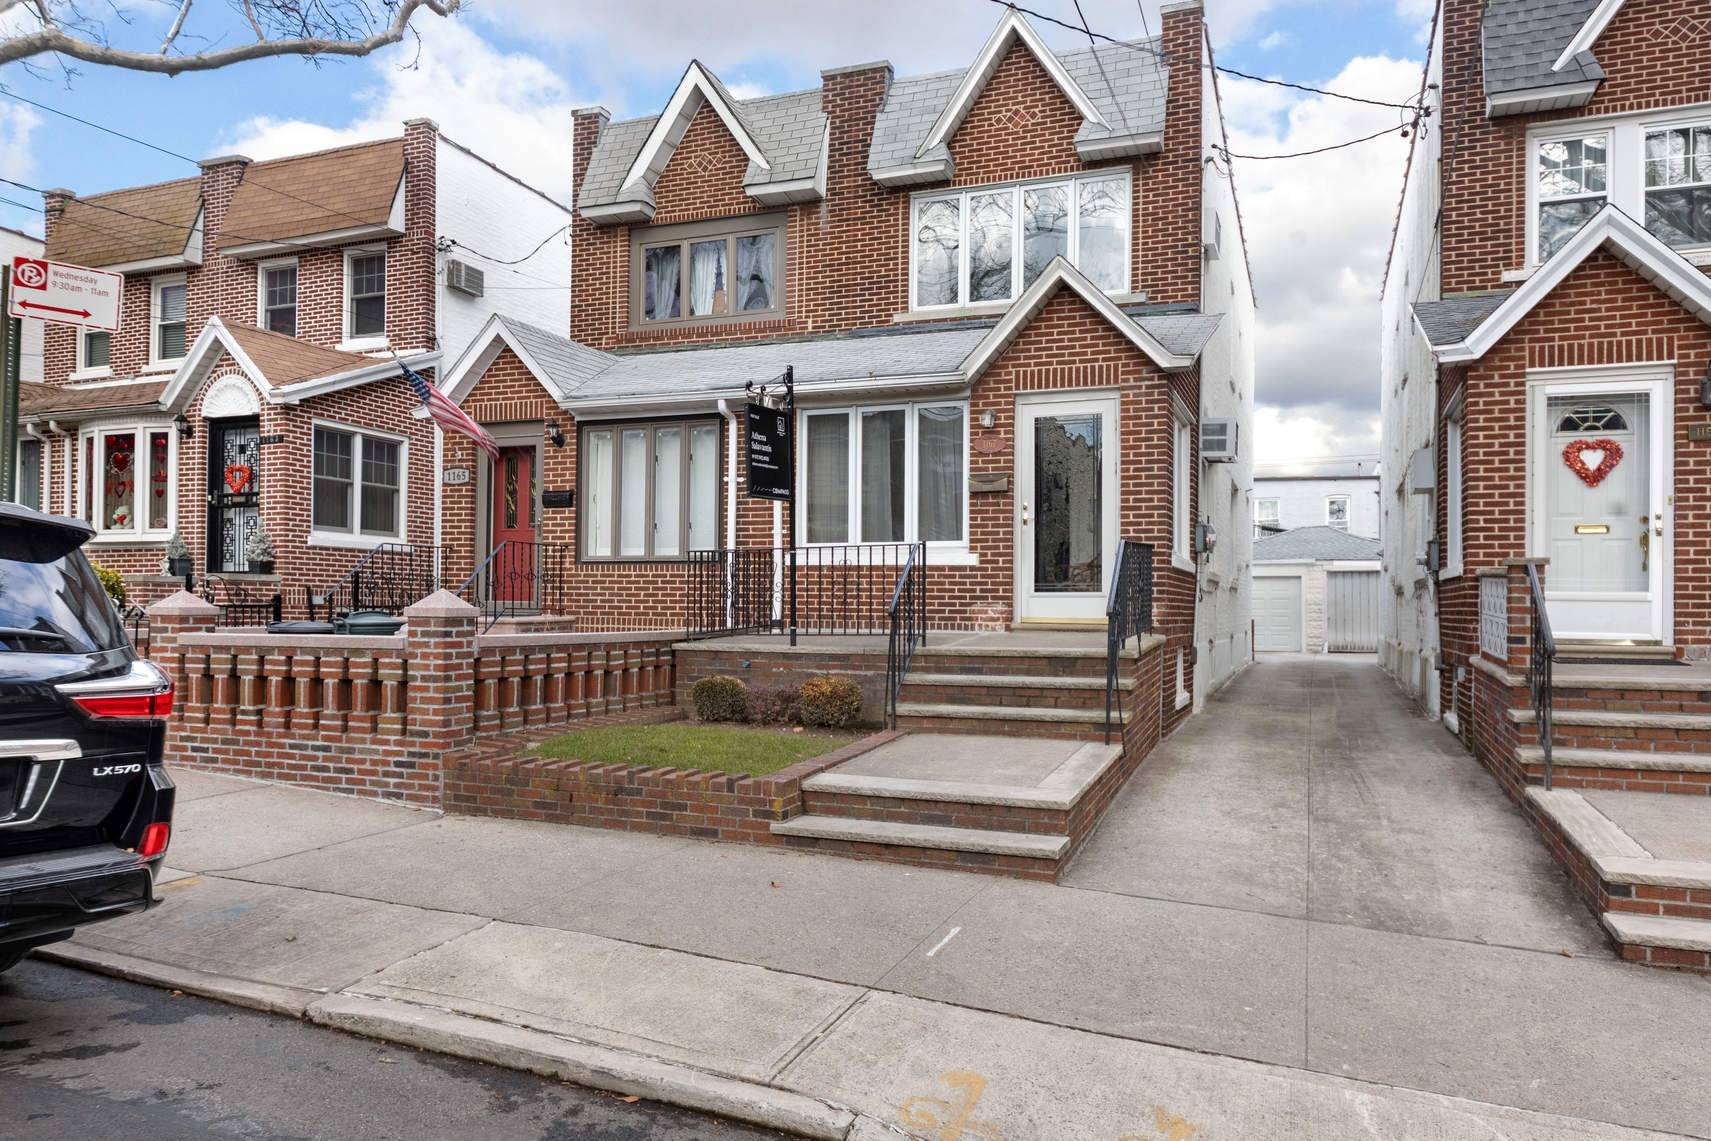 Excellent opportunity ! Perfect starter home and impeccably maintained prime Dyker location on beautiful tree lined block.